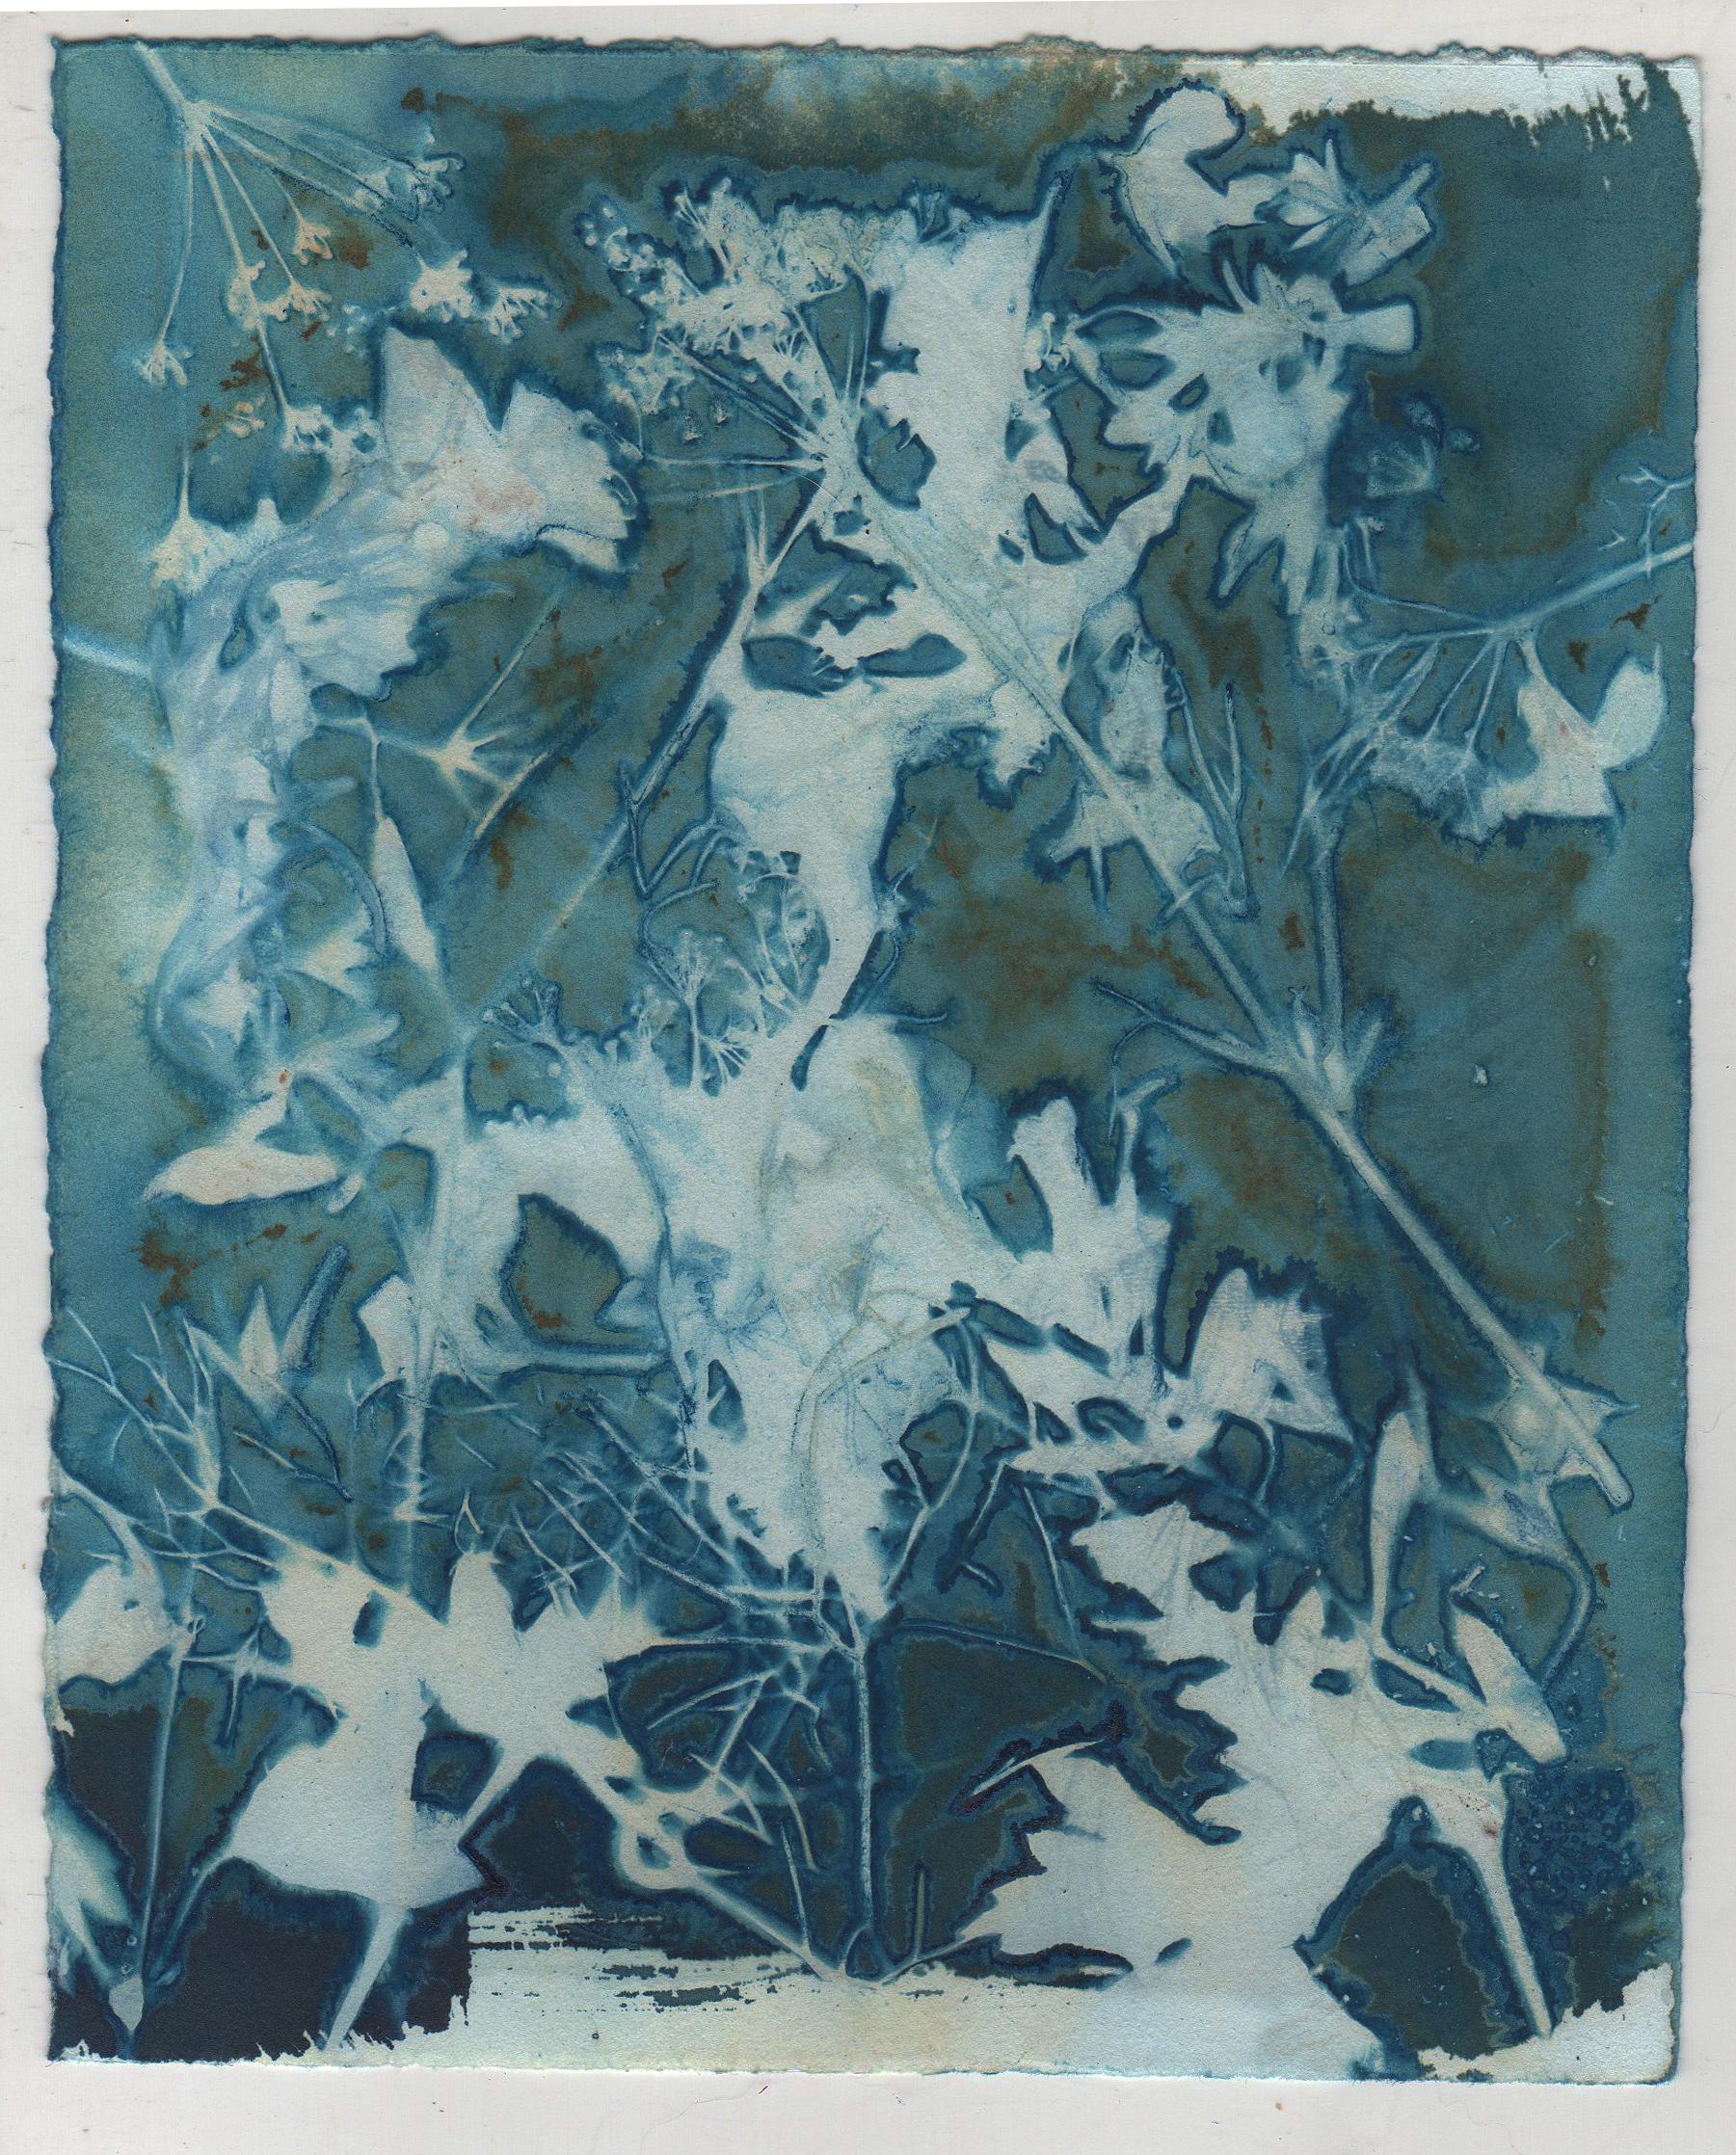 A set of  6 contemporary cyanotype prints in found mirrored frames by Amanda Besl from her most recent body of work created in 2019.  Each work measures 7